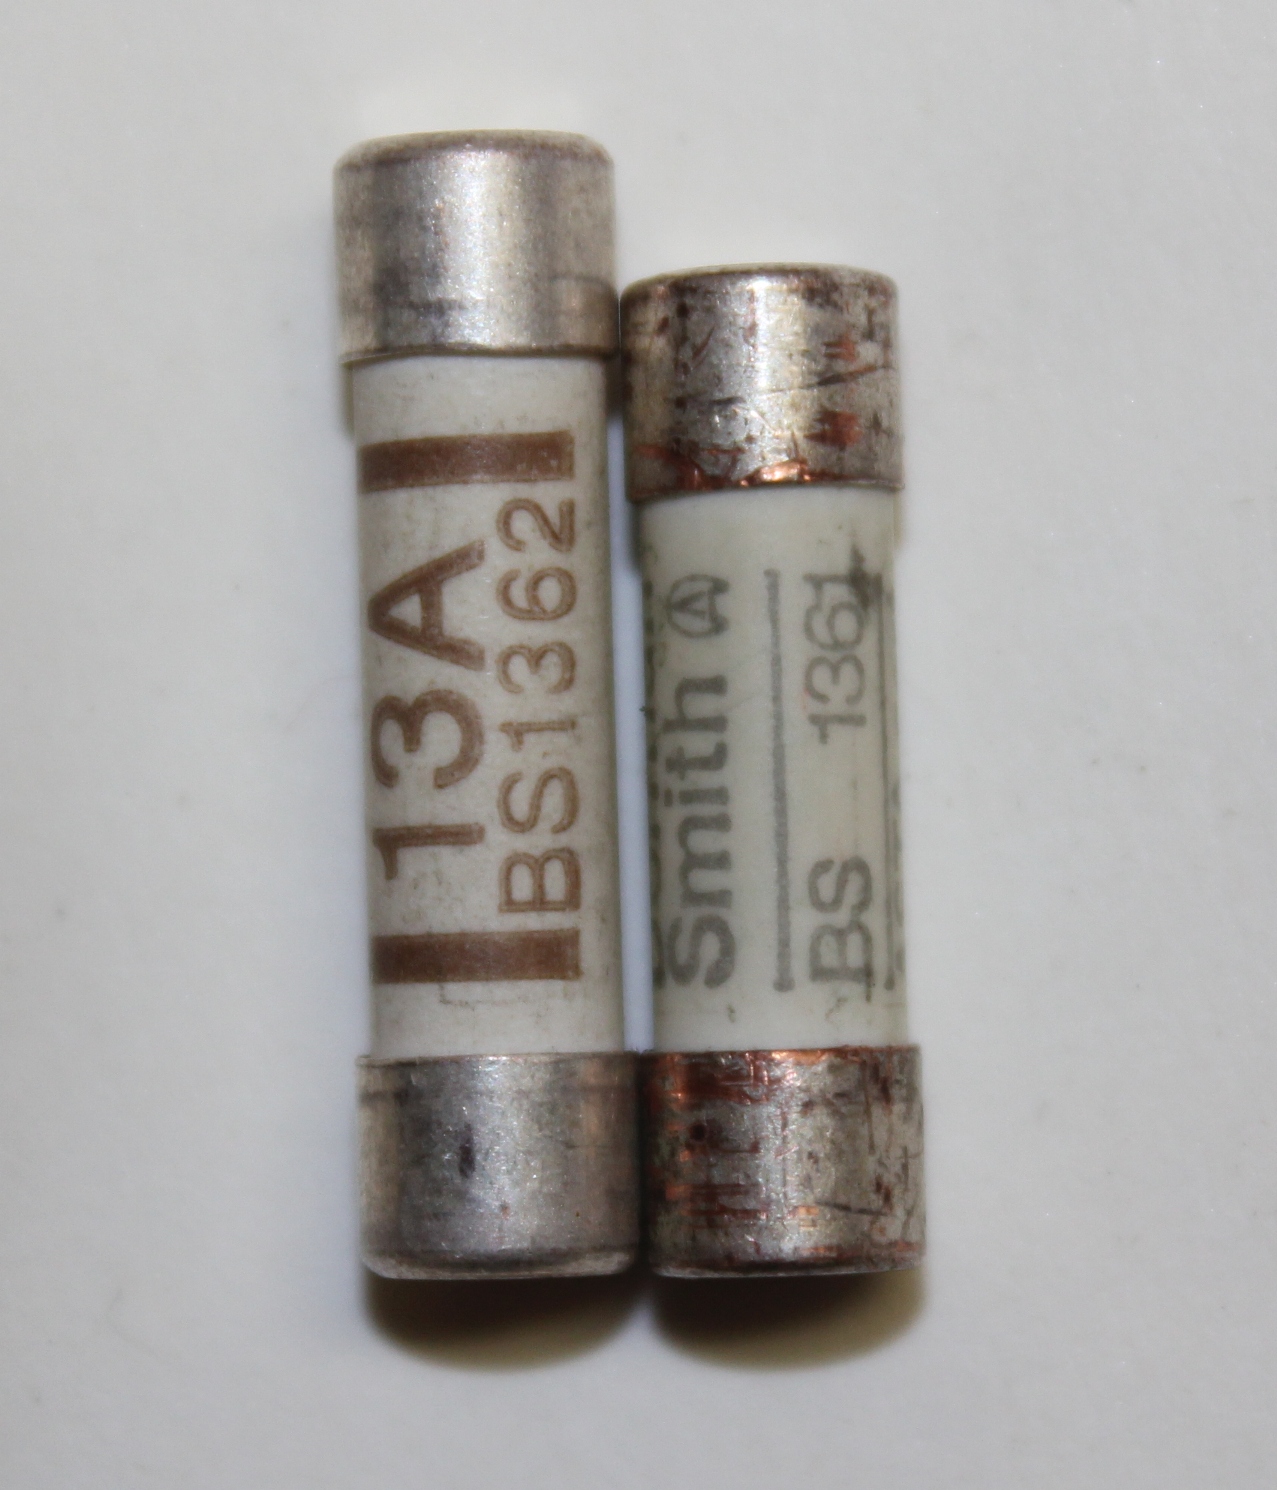 Fake 5A fuse with Genuine 13A fuse